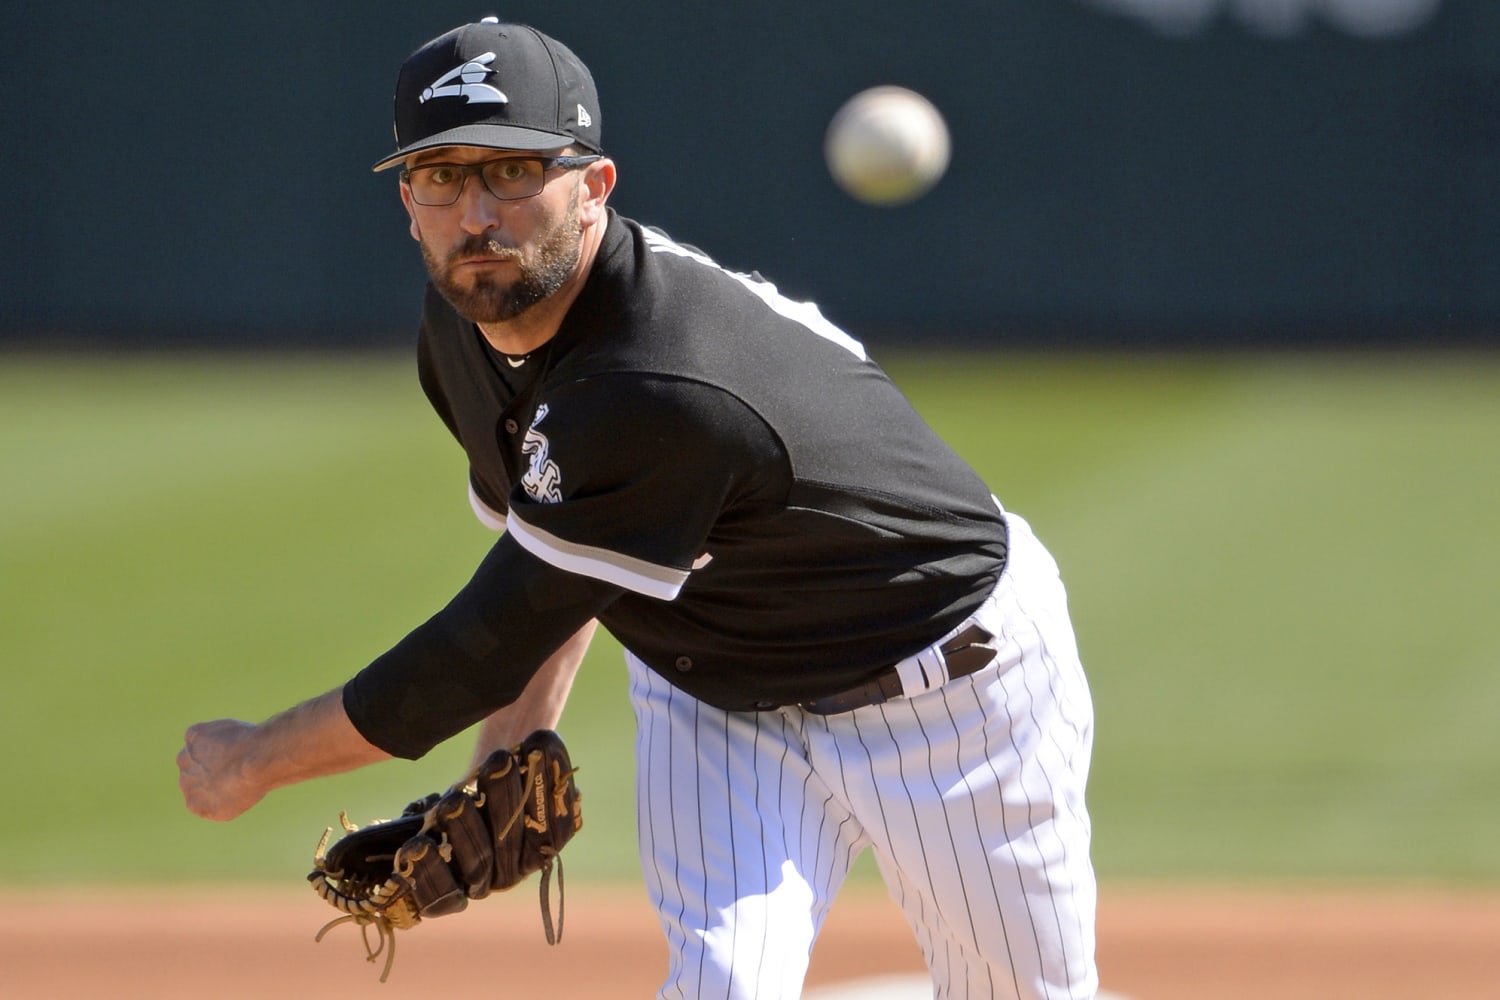 Former major league pitcher T.J. House comes out as gay